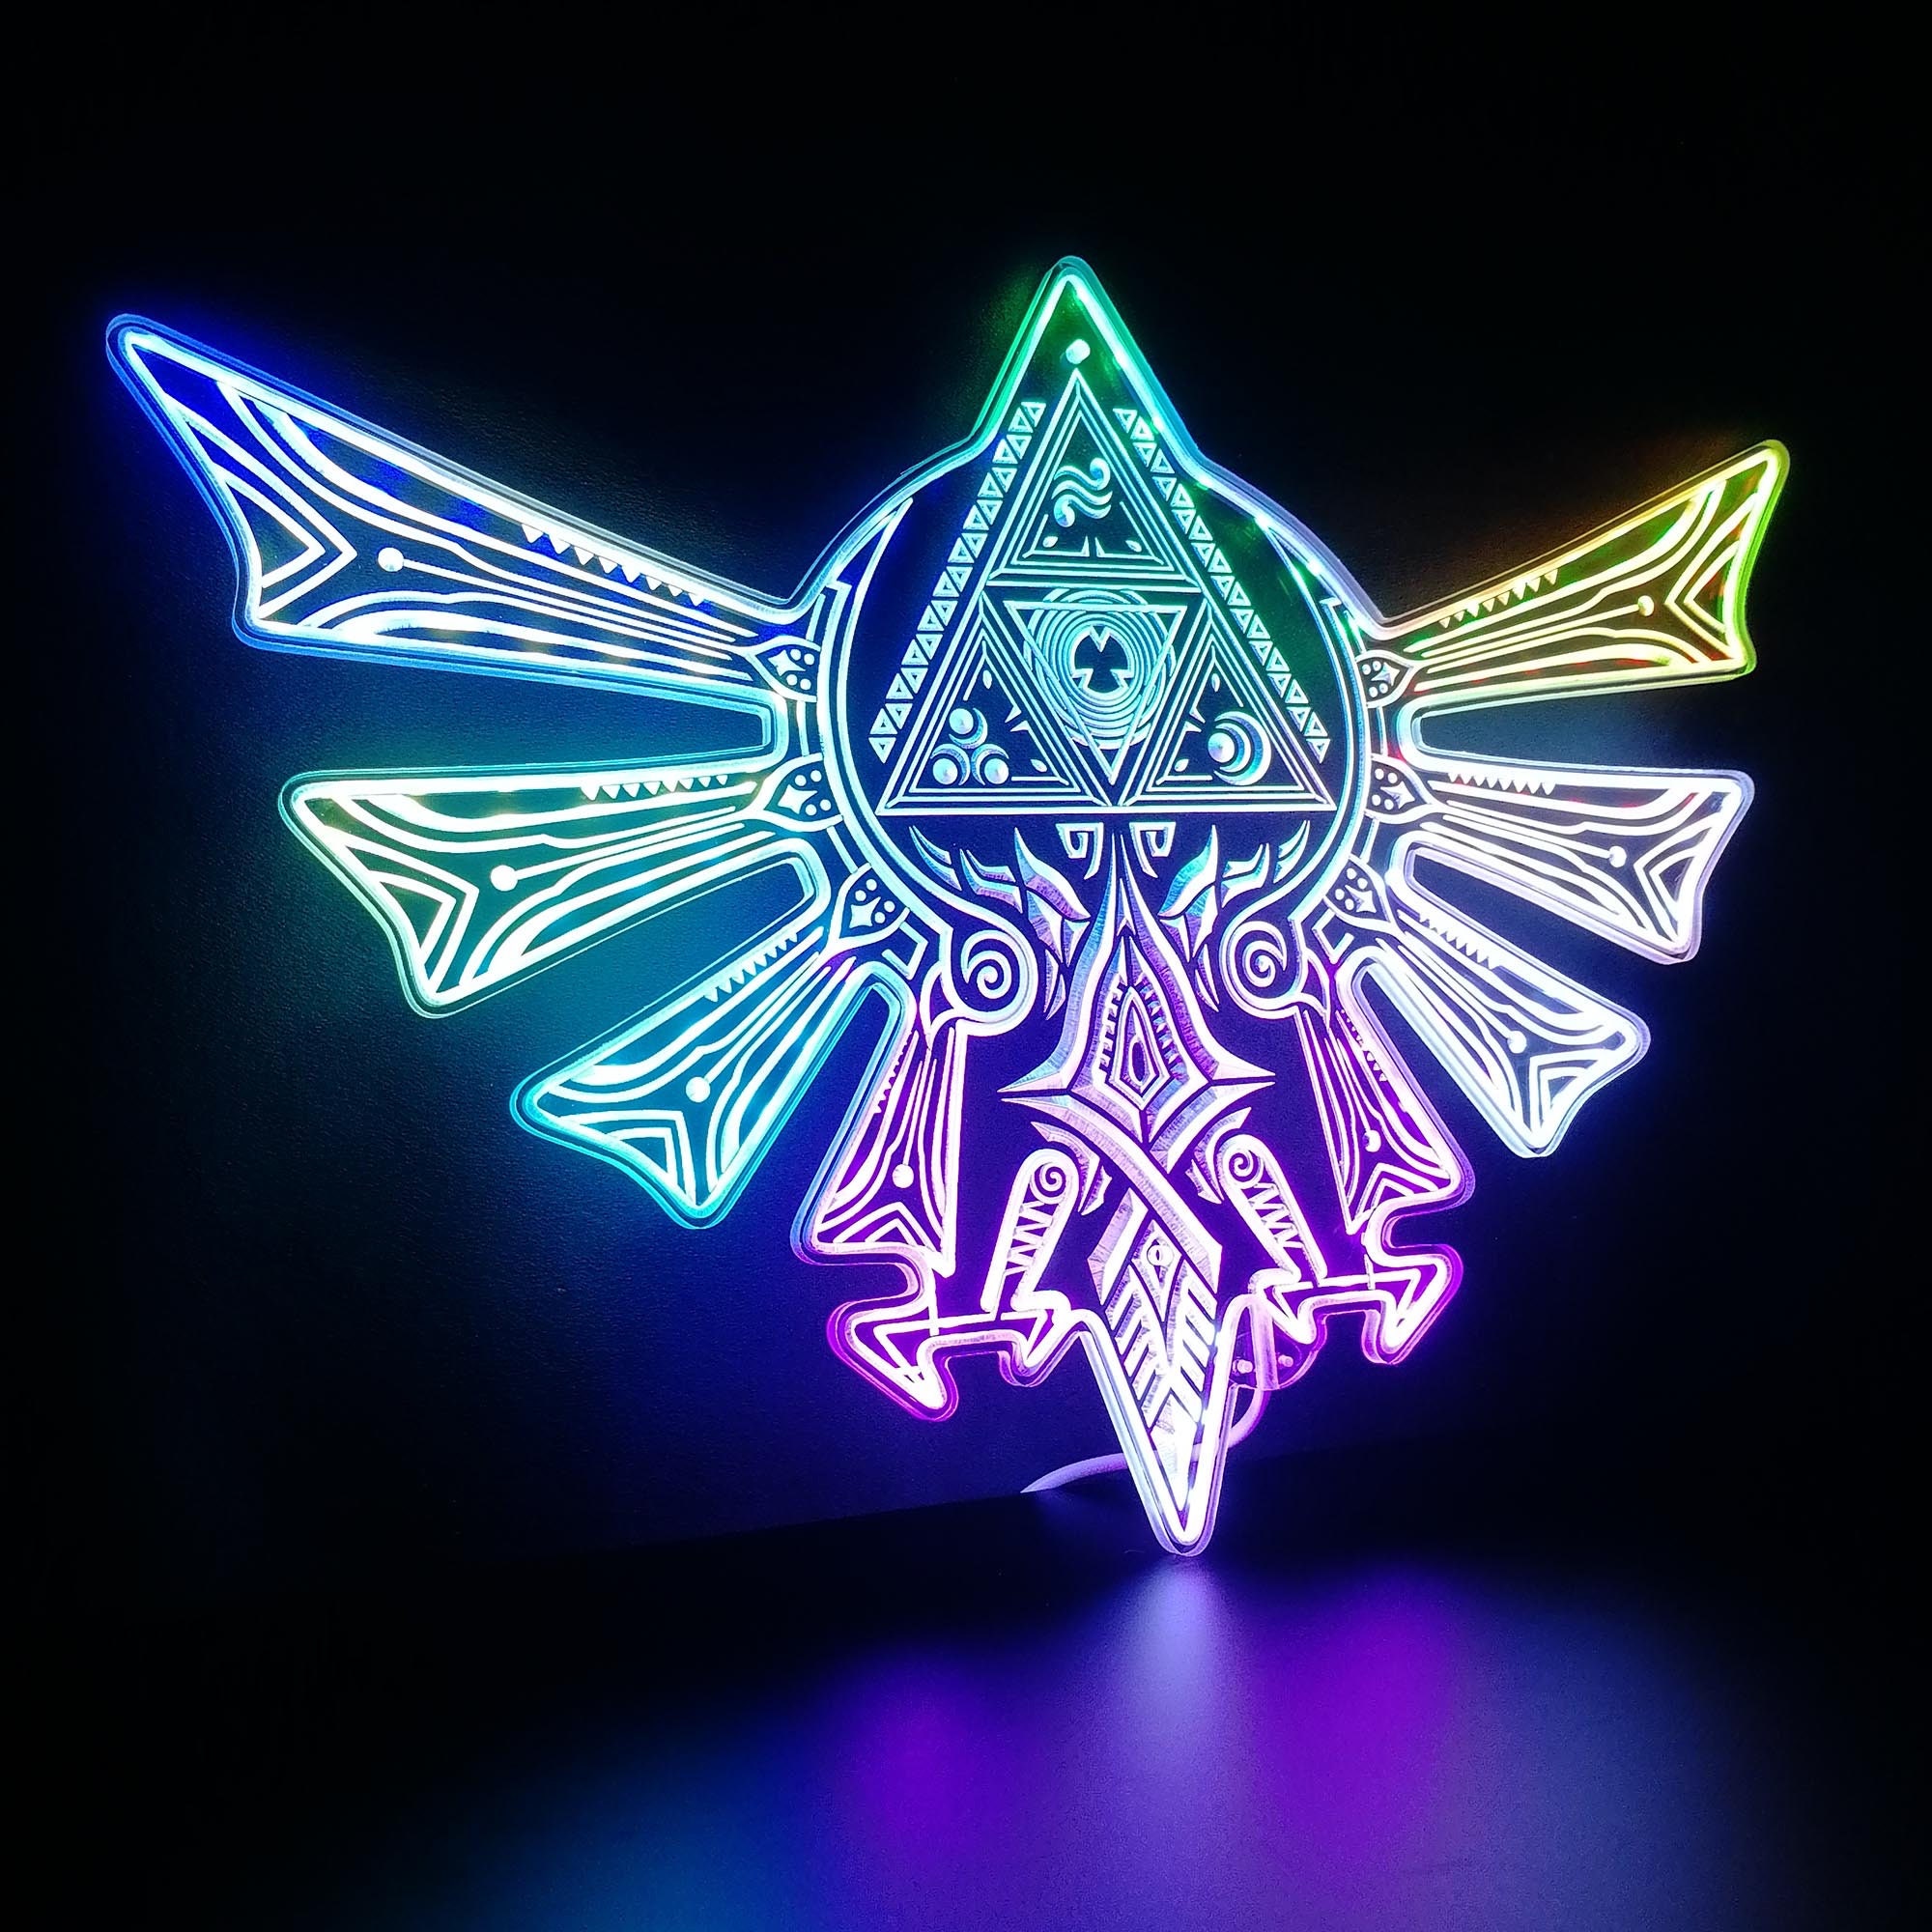 3D Illusion Night Light Legend of Zelda Bedside Lamp, Zelda Link's Sword  and Shield Sign USB Powered Diammable Color Changing Table Lamp for Child  Room Decor Birthday Gift 